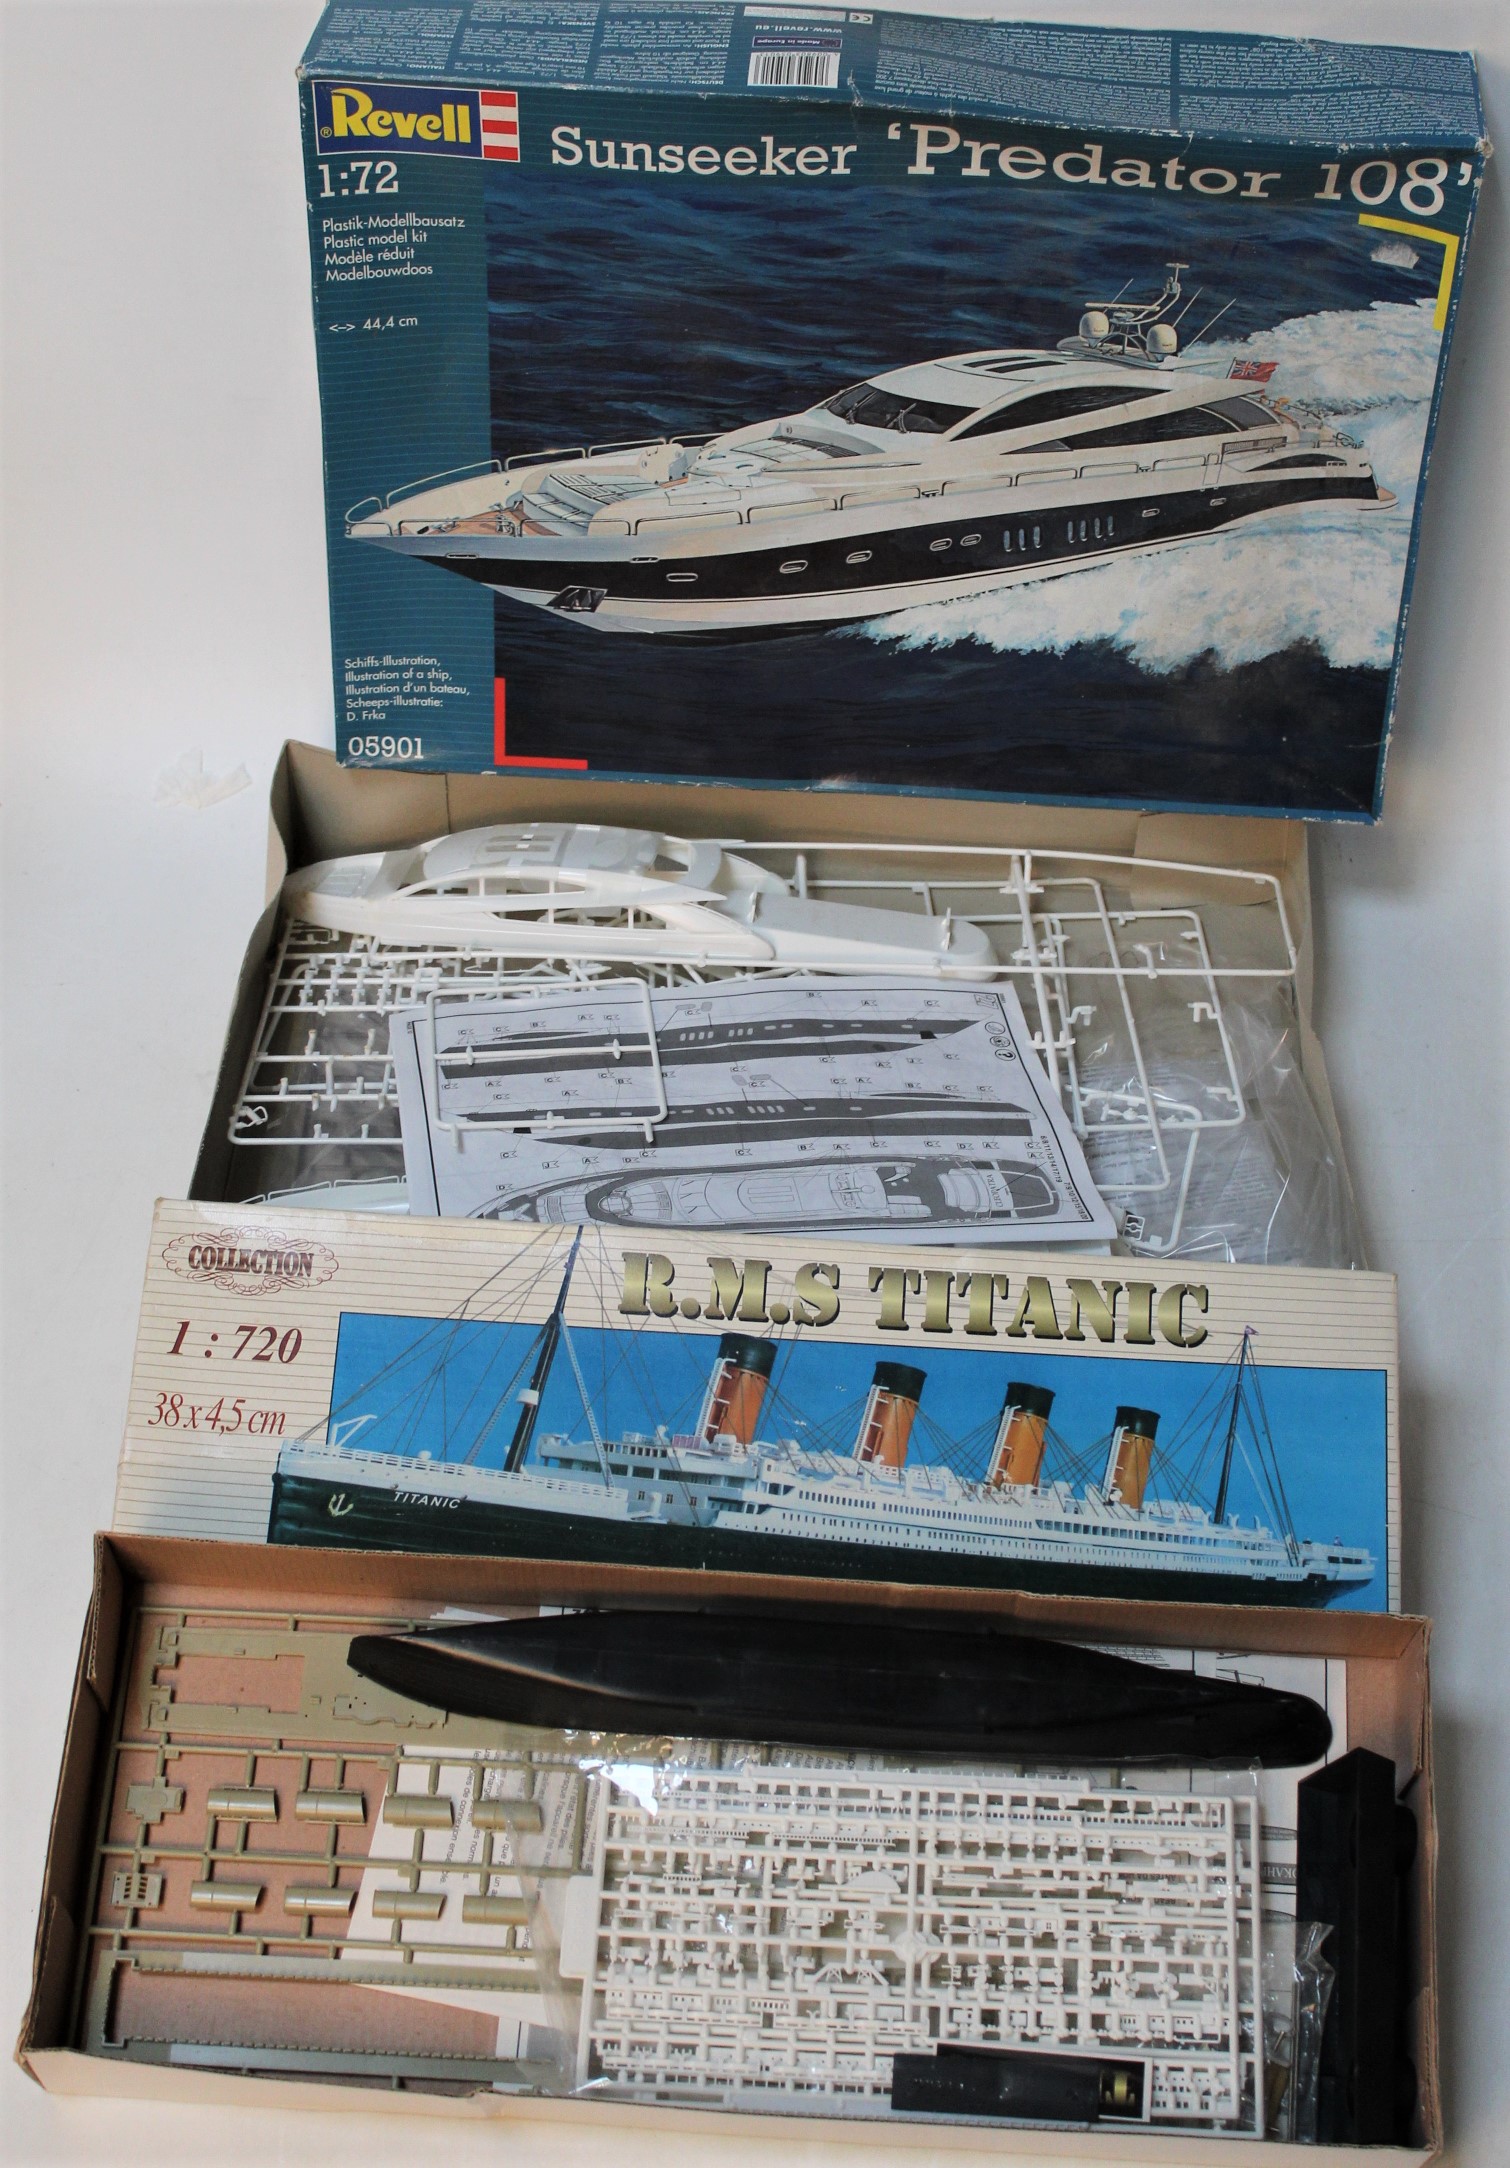 Sold at Auction: 4 Vintage Hobby Kits - including 1 Revell 1/720